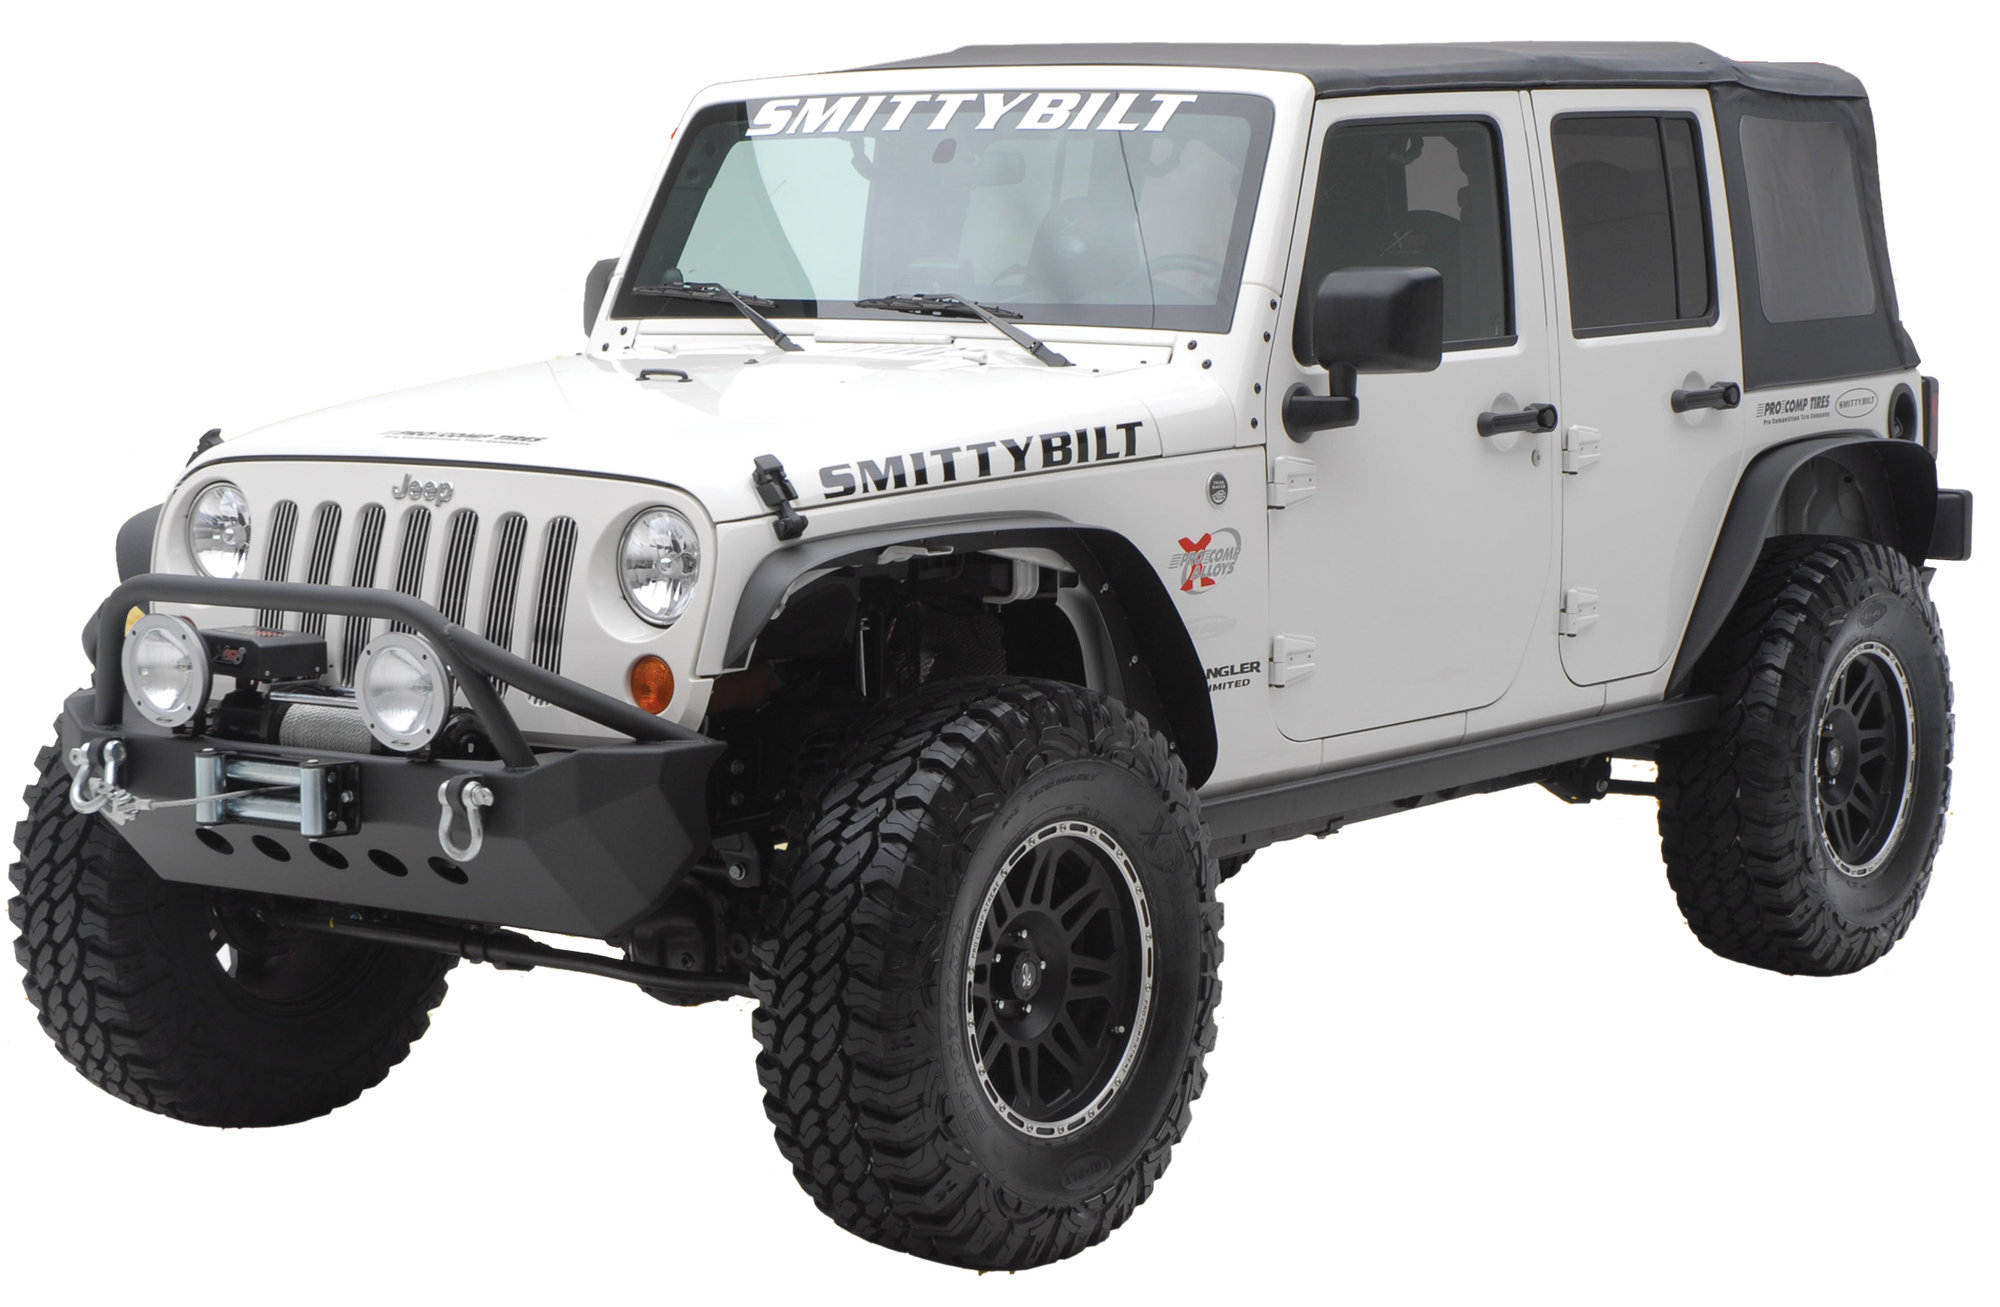 Smittybilt Classic Side Protection (Rubicon Style Rock Rails) for 07-18